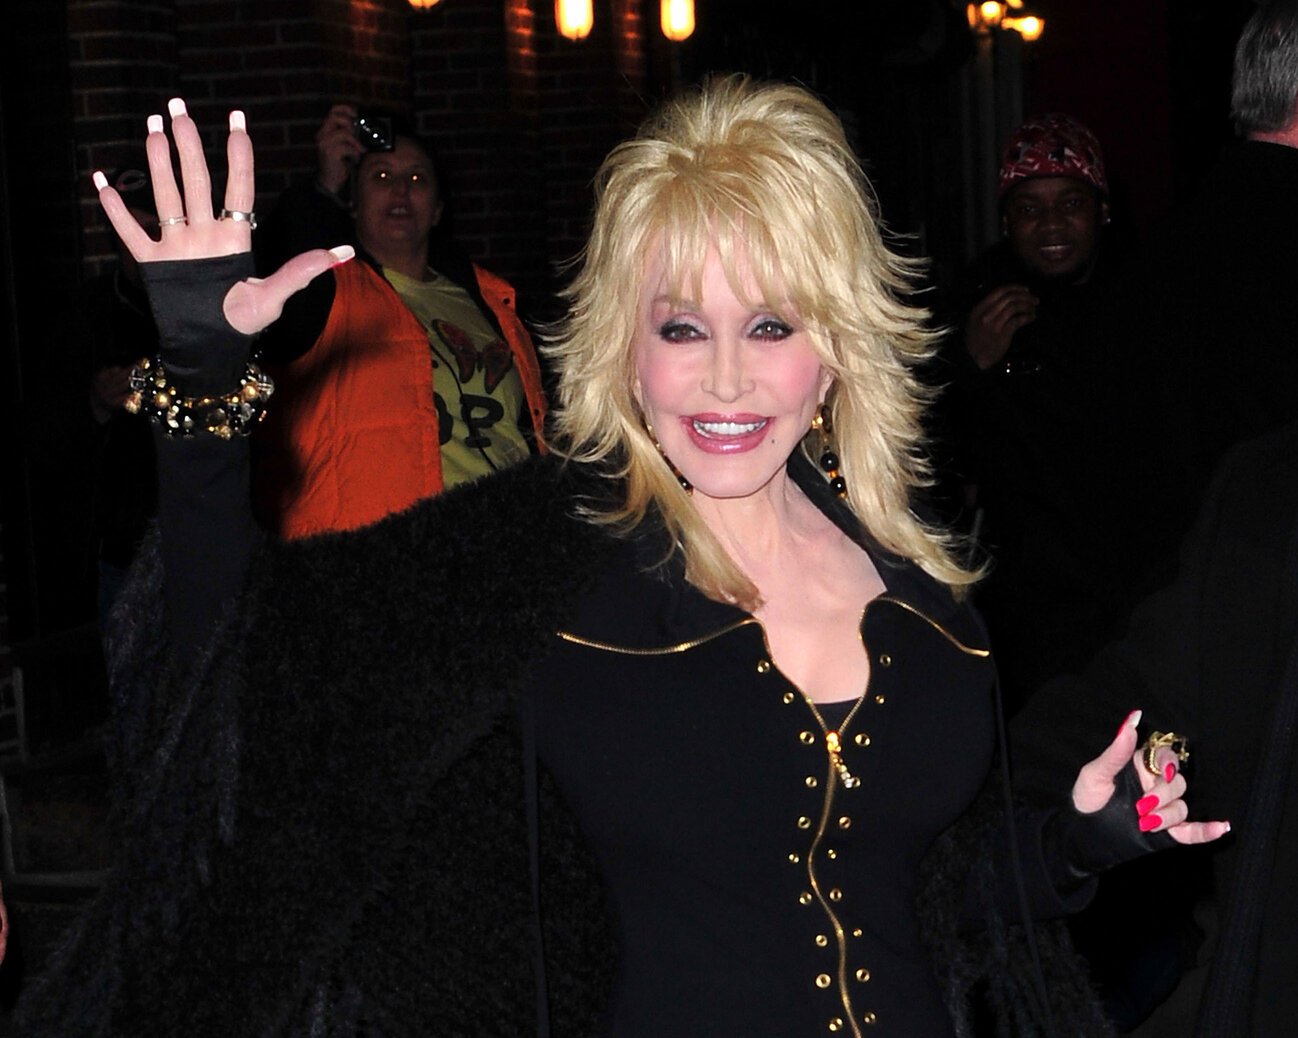 Dolly Parton visiting "Late Show with David Letterman" in 2012. She's wearing a black outfit with her signature black fingerless gloves.